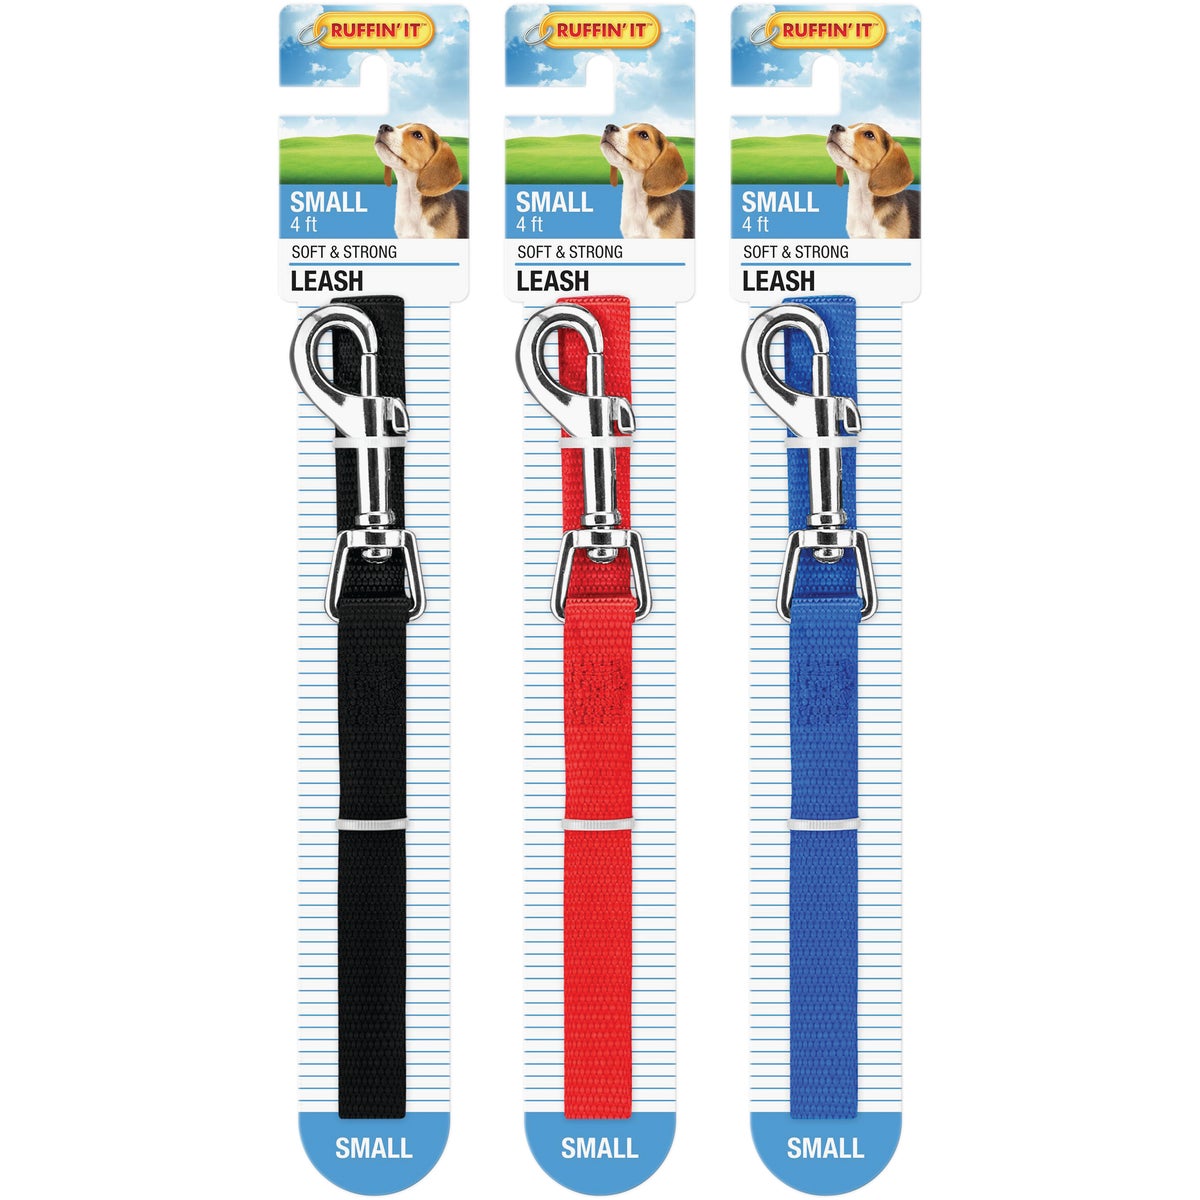 Item 810411, Durable nylon dog leash ideal for training and teaching commands.